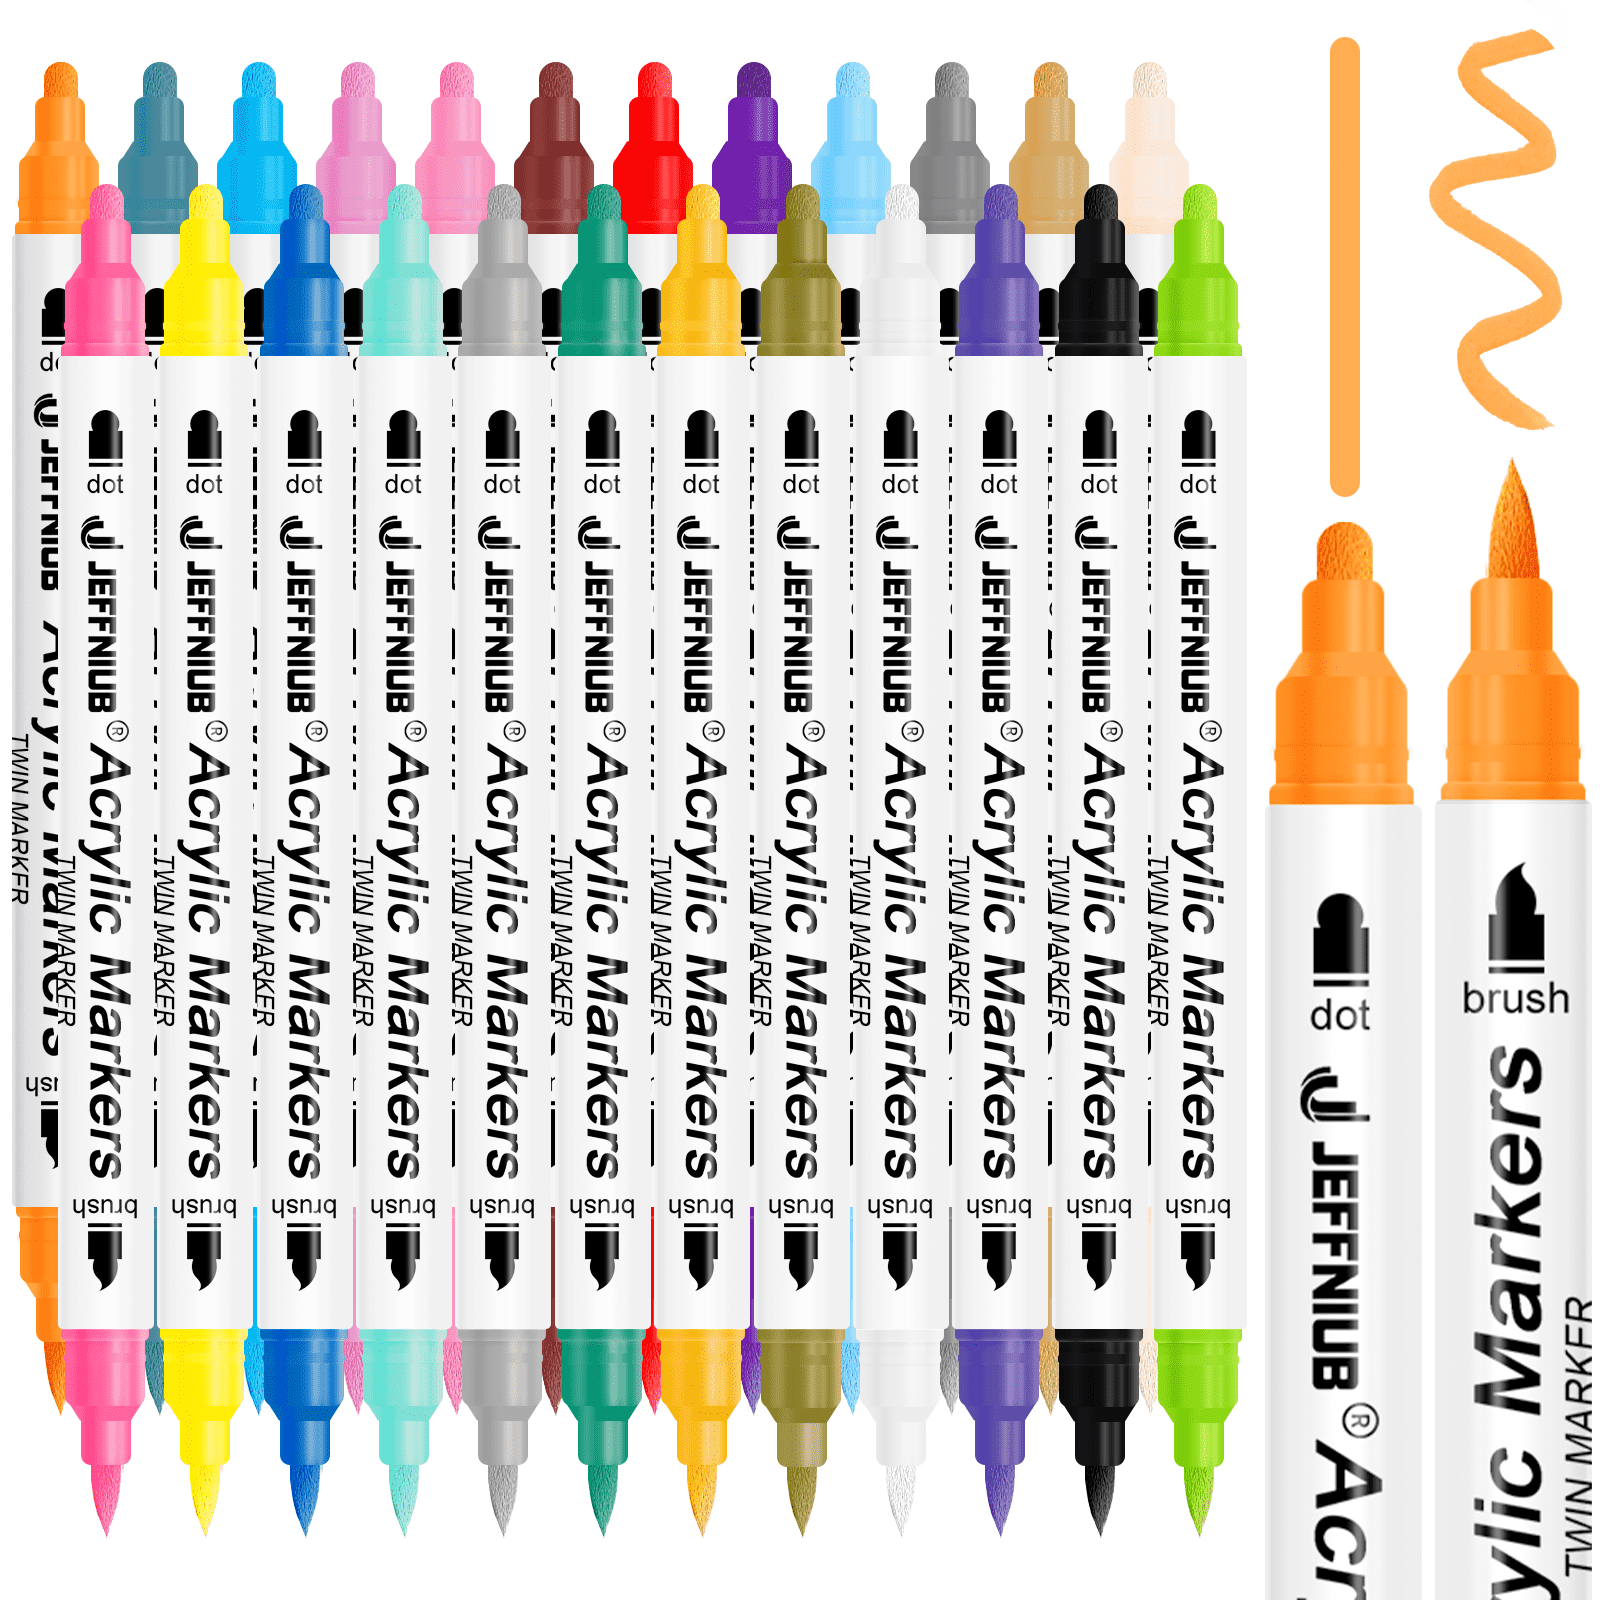 Acrylic Paint Pens Markers, 24 Colors Dual Tip Acrylic Paint Pens for Rock  Painting, Wood, Canvas, Stone, Glass, Ceramic Surfaces, DIY Crafts Making